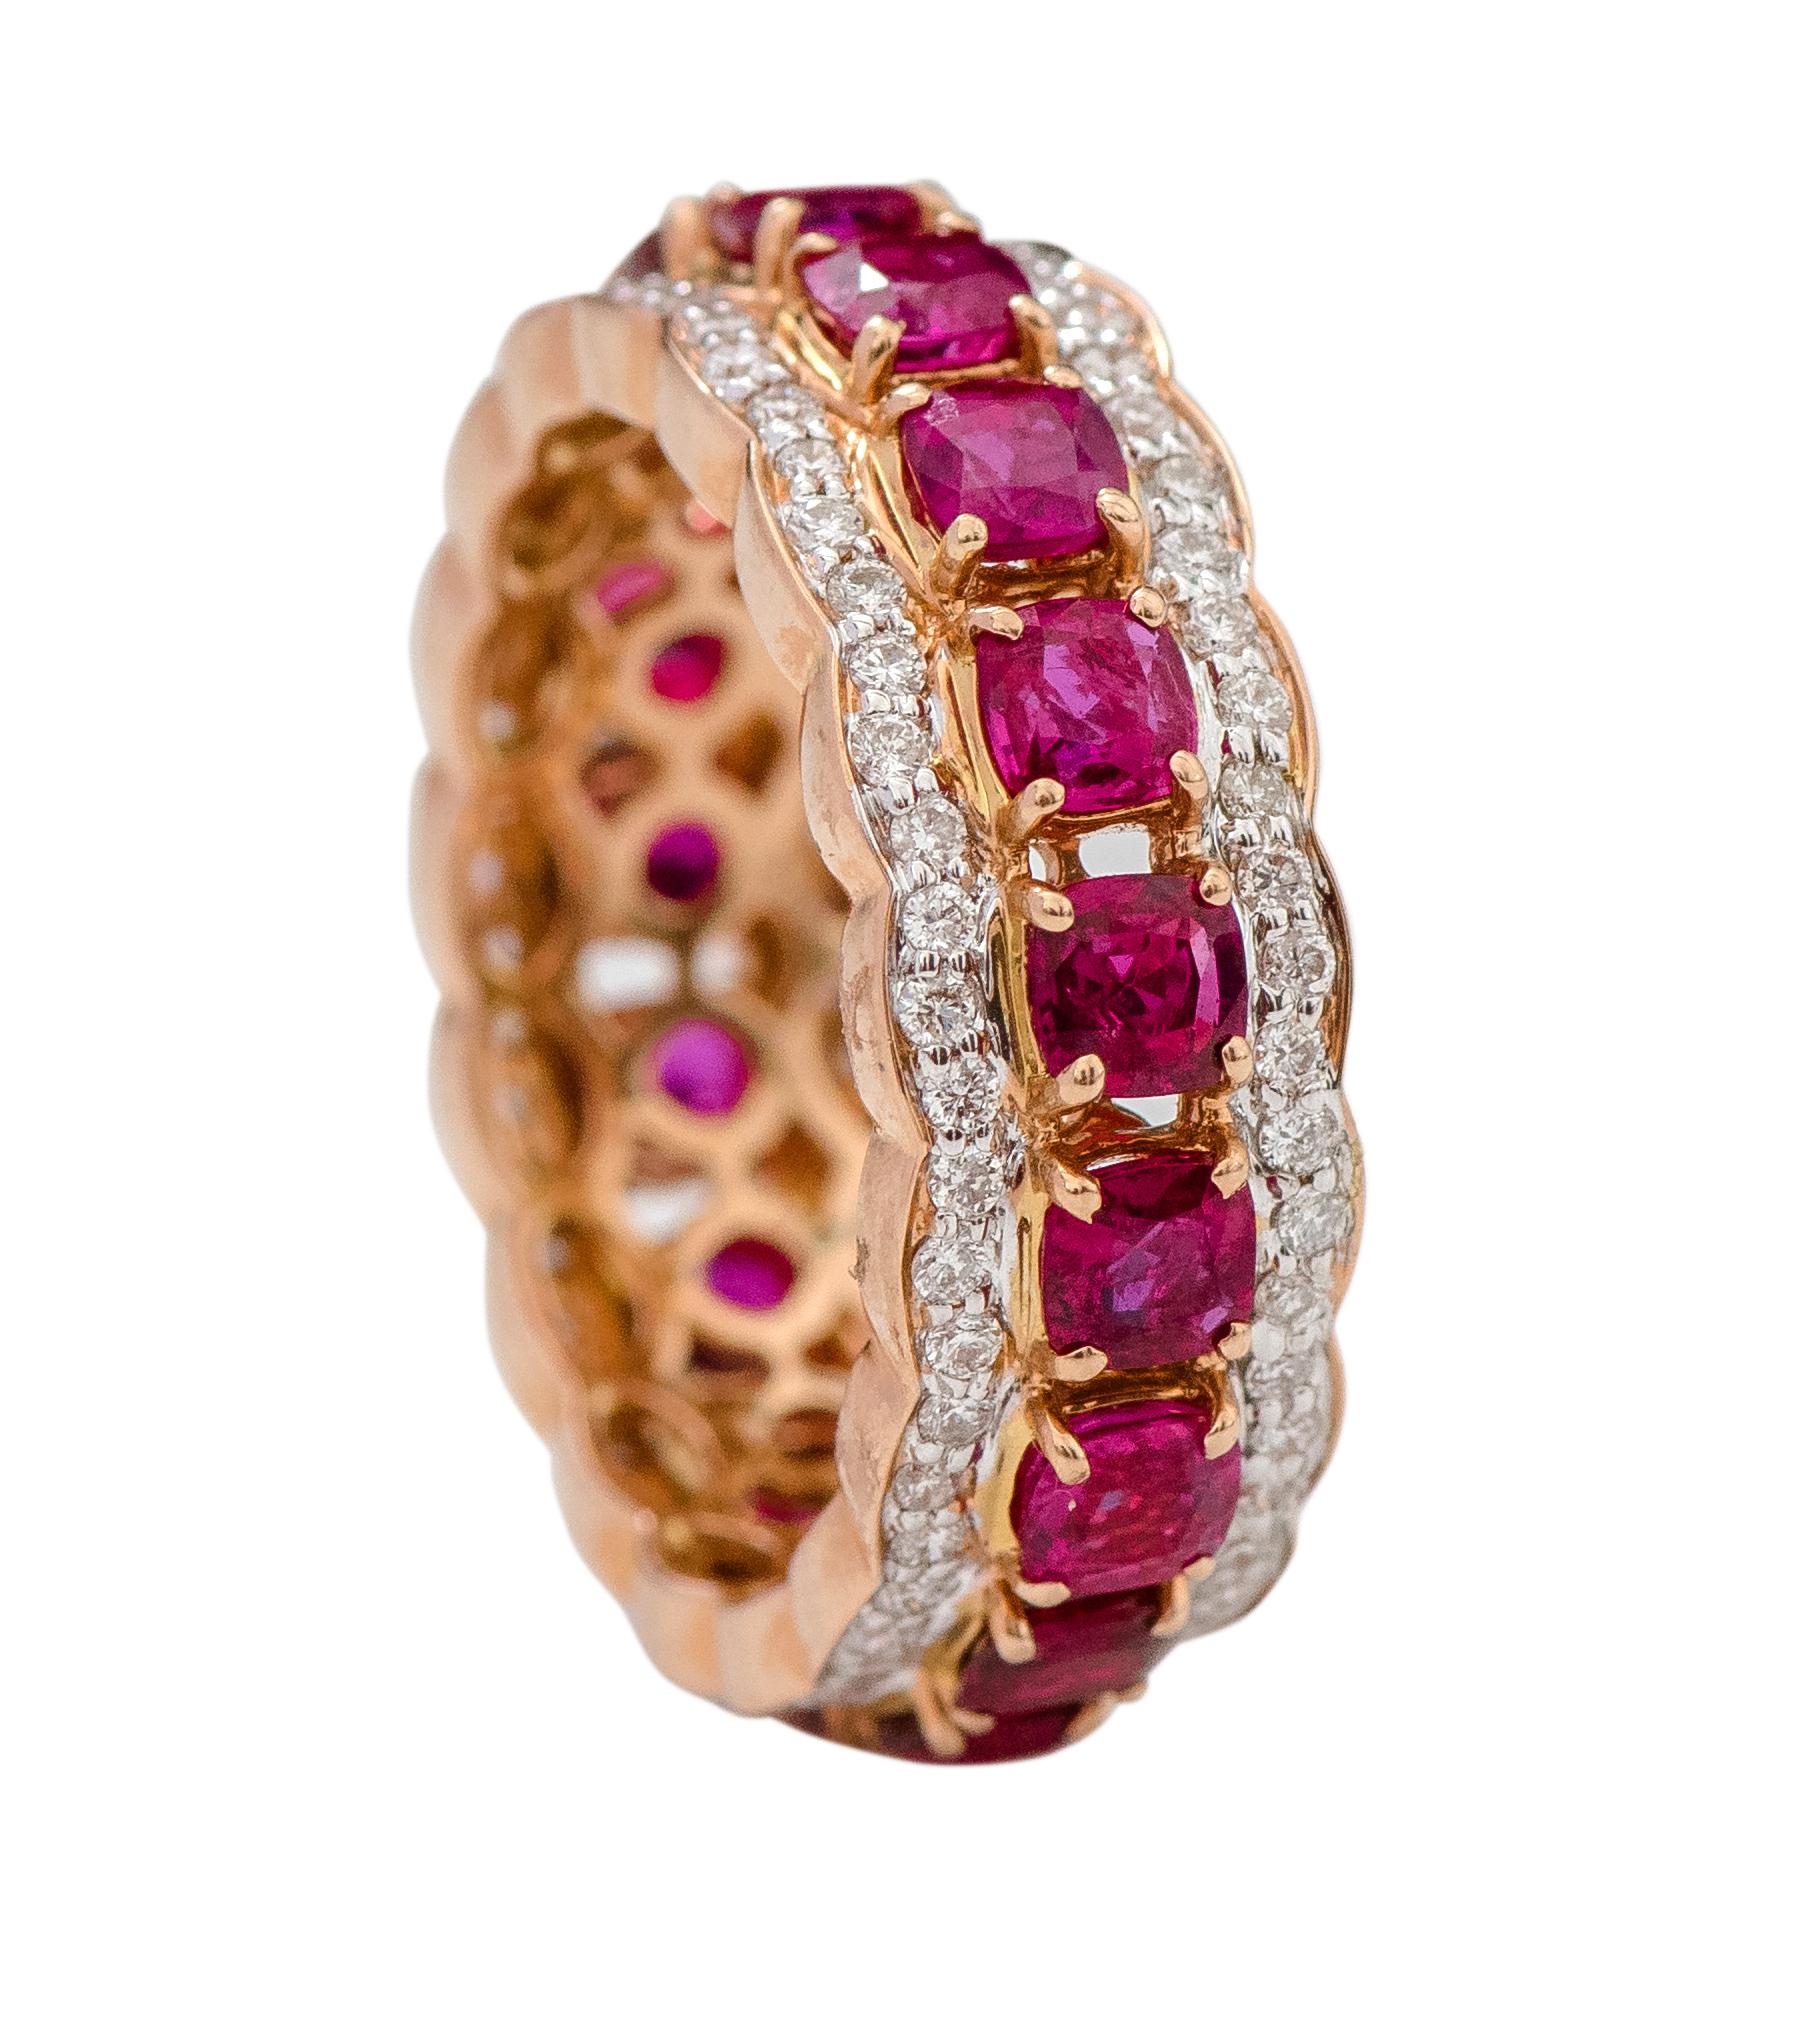 18 Karat Rose Gold 2.23 Carat Cushion-Cut Ruby and Diamond Eternity Band Ring

This phenomenal blood-red ruby and diamond band is exquisite. The solitaire square-cushion shape rubies in prong setting are brilliantly surrounded by pave set round